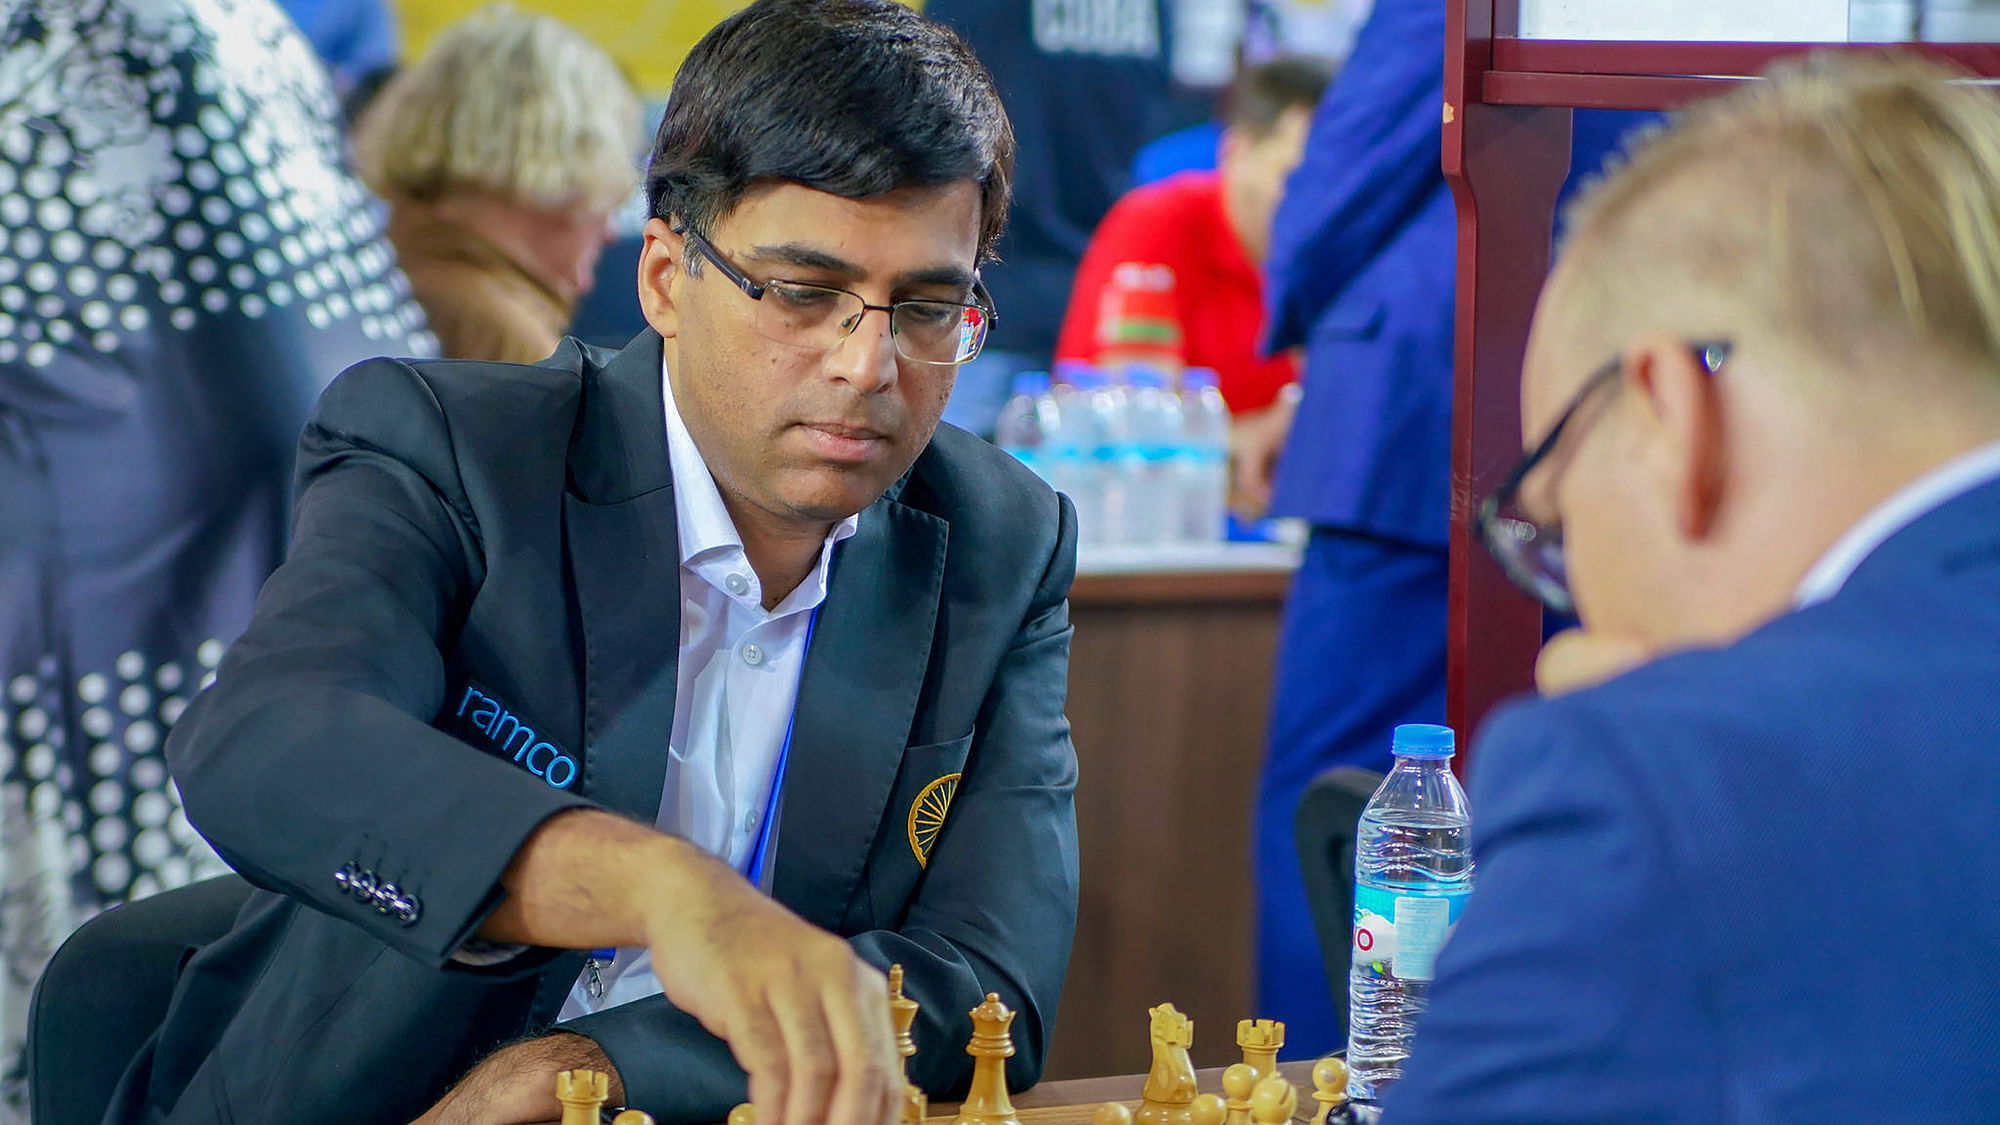 Batumi: Five-time world champion Viswanathan Anand plays against Markus Ragger of Austria in the second round of the team event at 43rd Chess Olympiad in Batumi, Geogia.